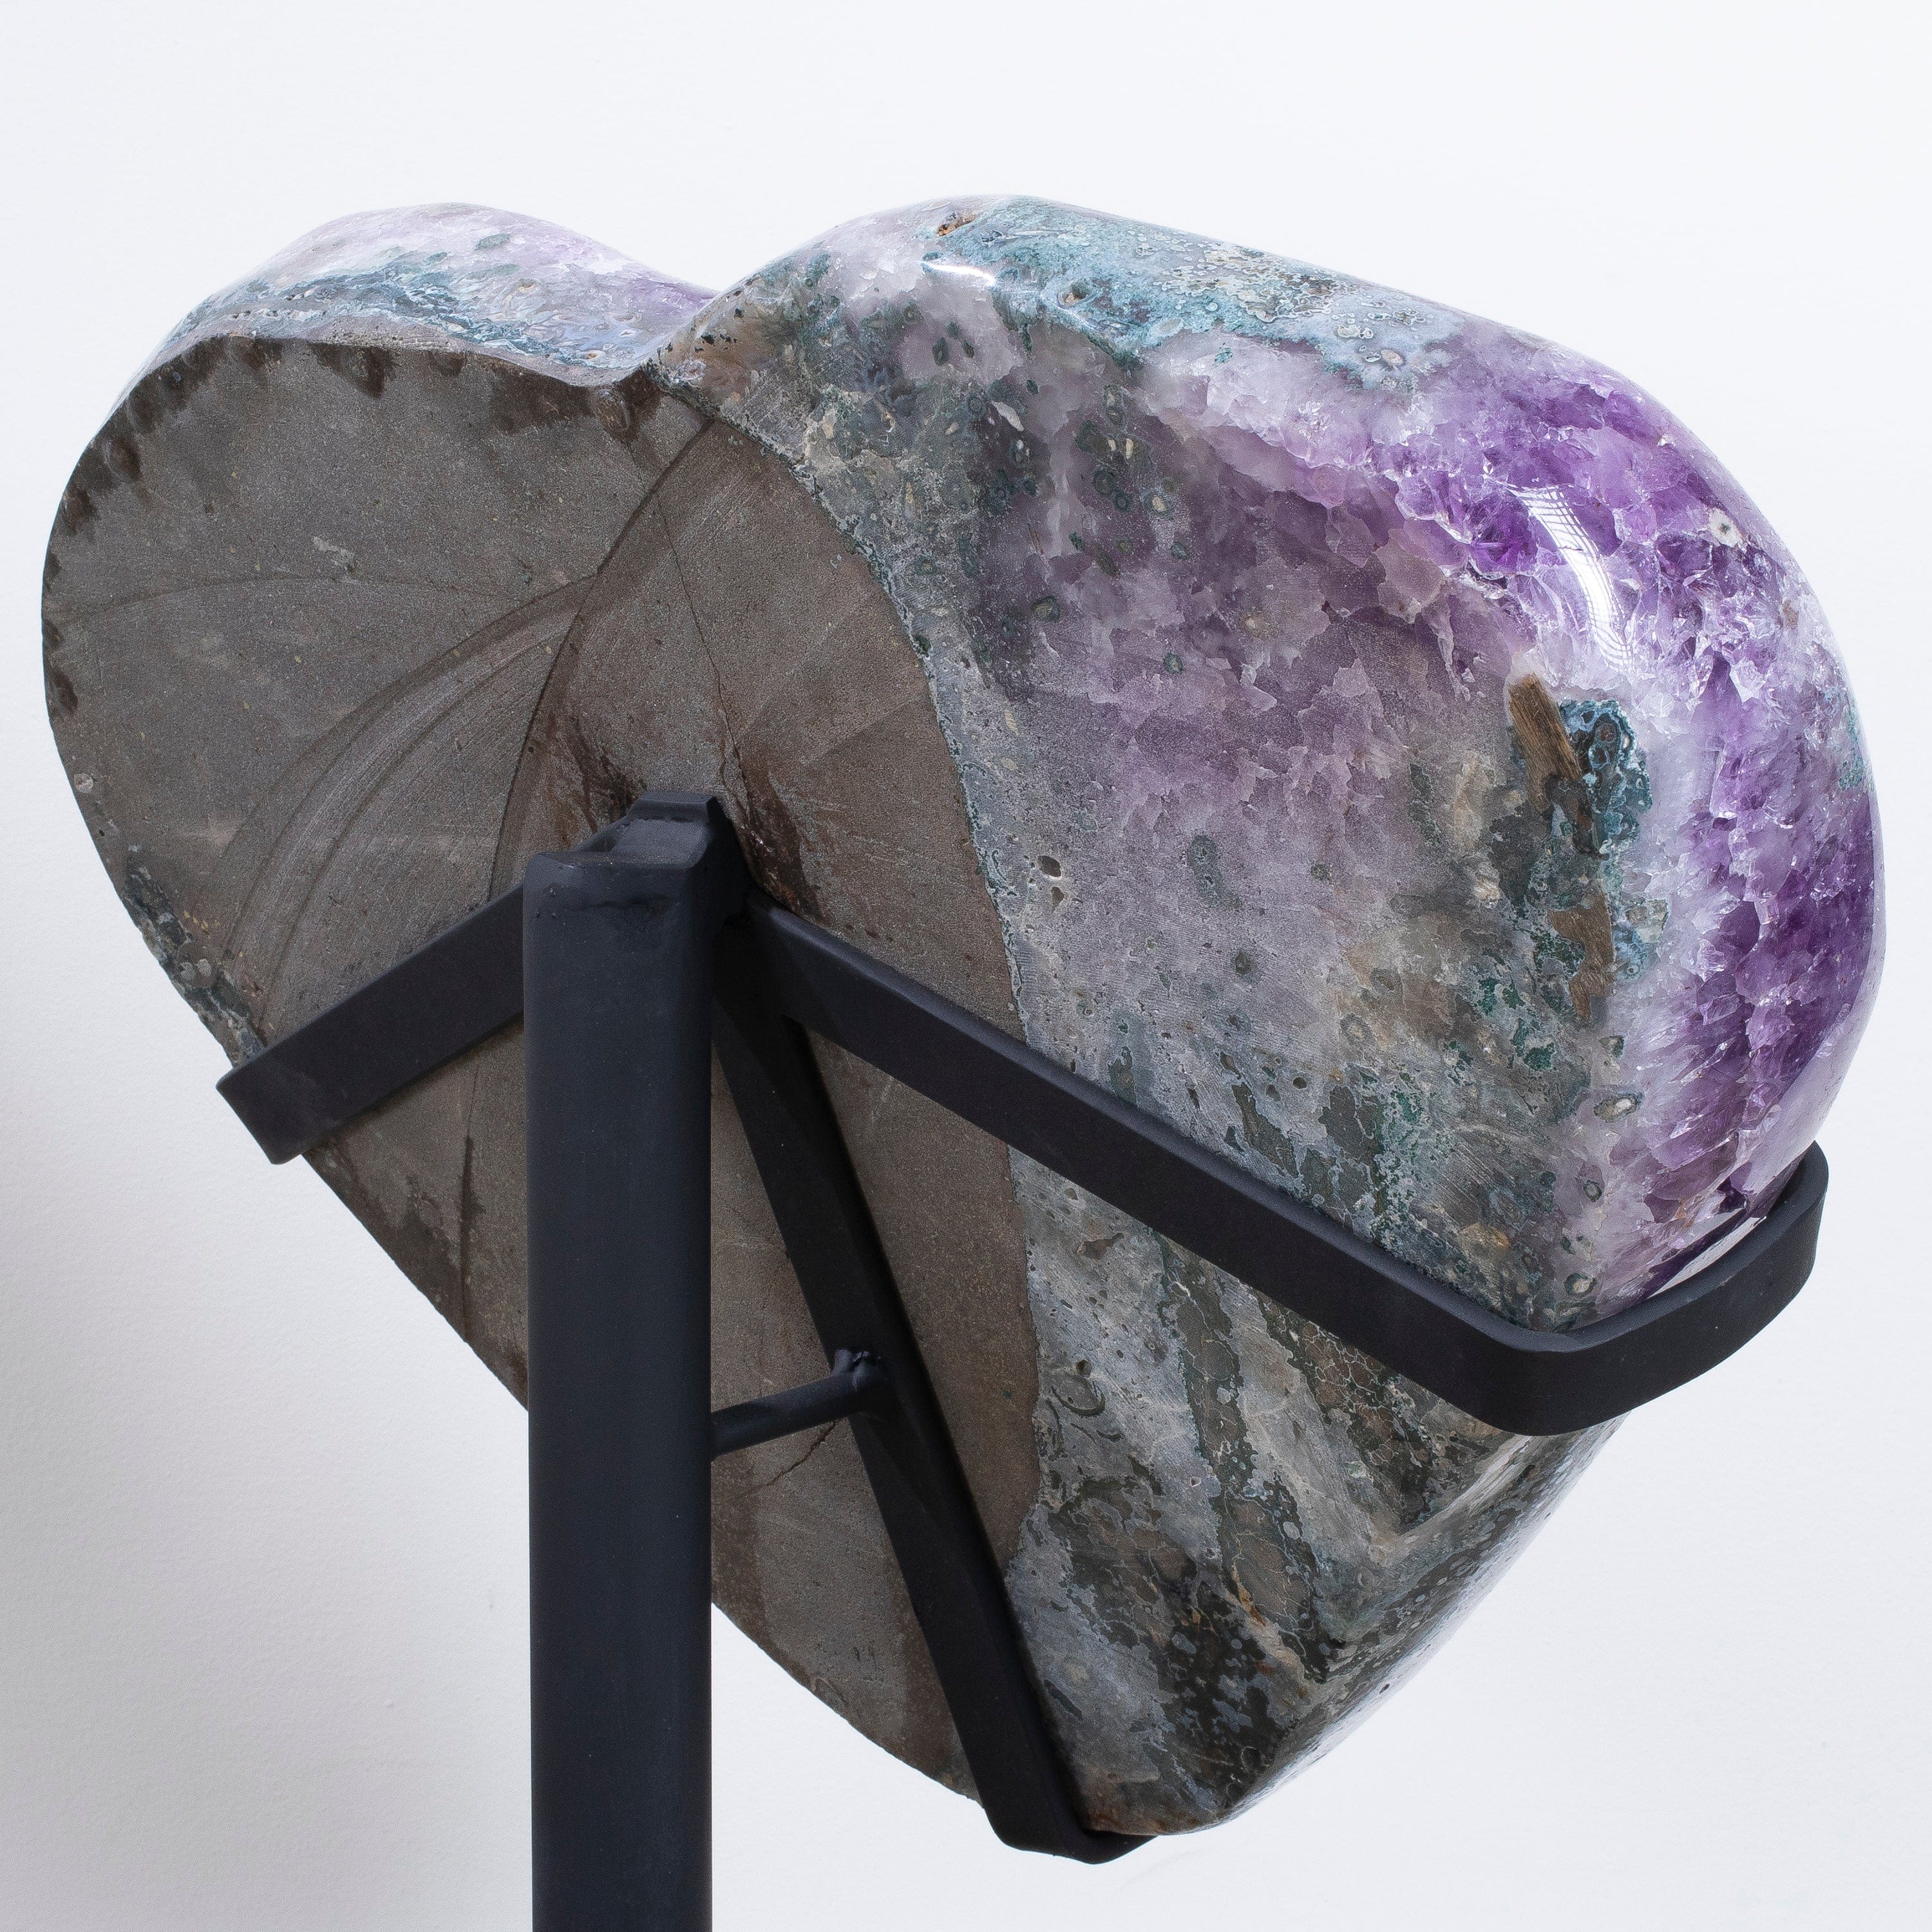 Kalifano Amethyst Amethyst Geode Heart Carving from Brazil on Custom Stand - 27" / 58 lbs BAG16000.010